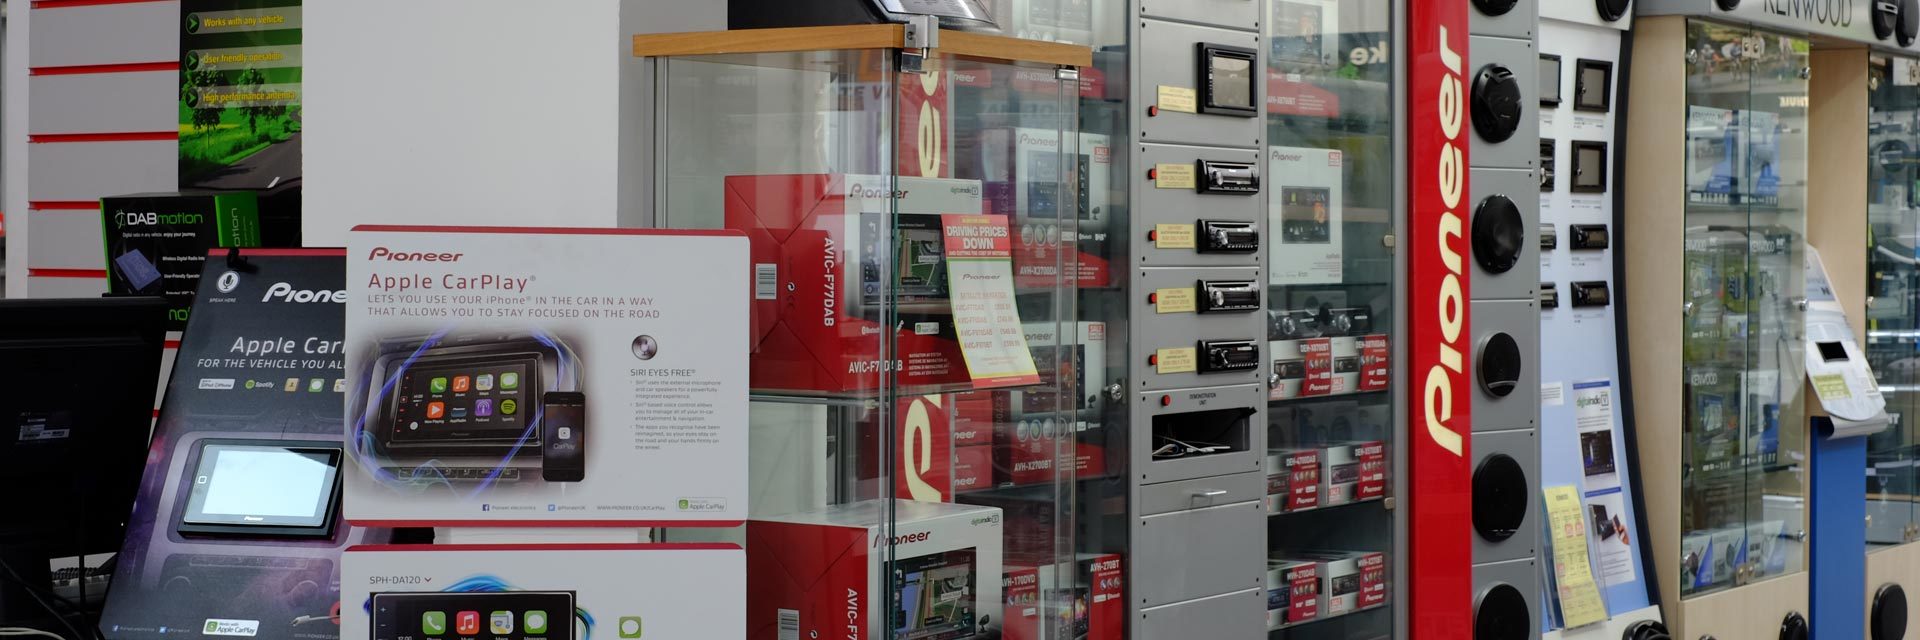 Image of audio products in store